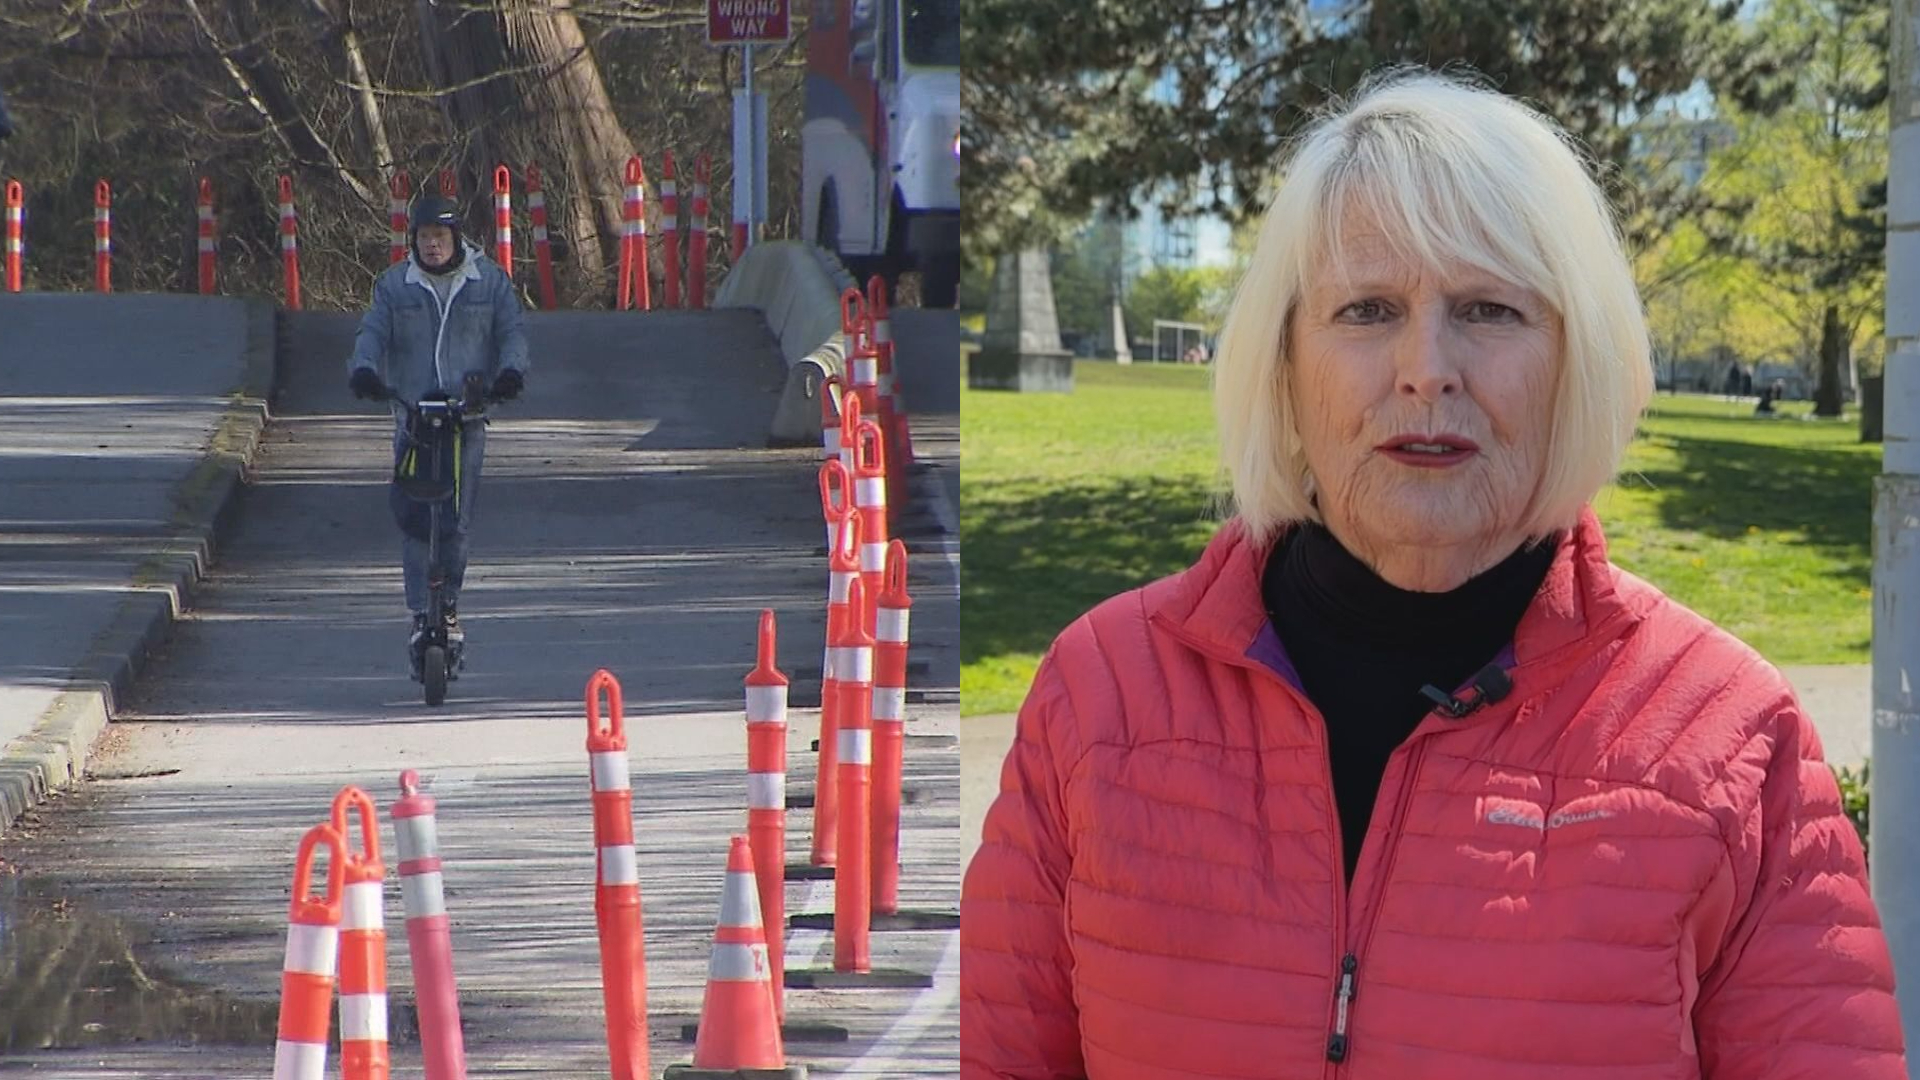 Vancouver cyclist wants to ban electric scooters and ebikes on seawall